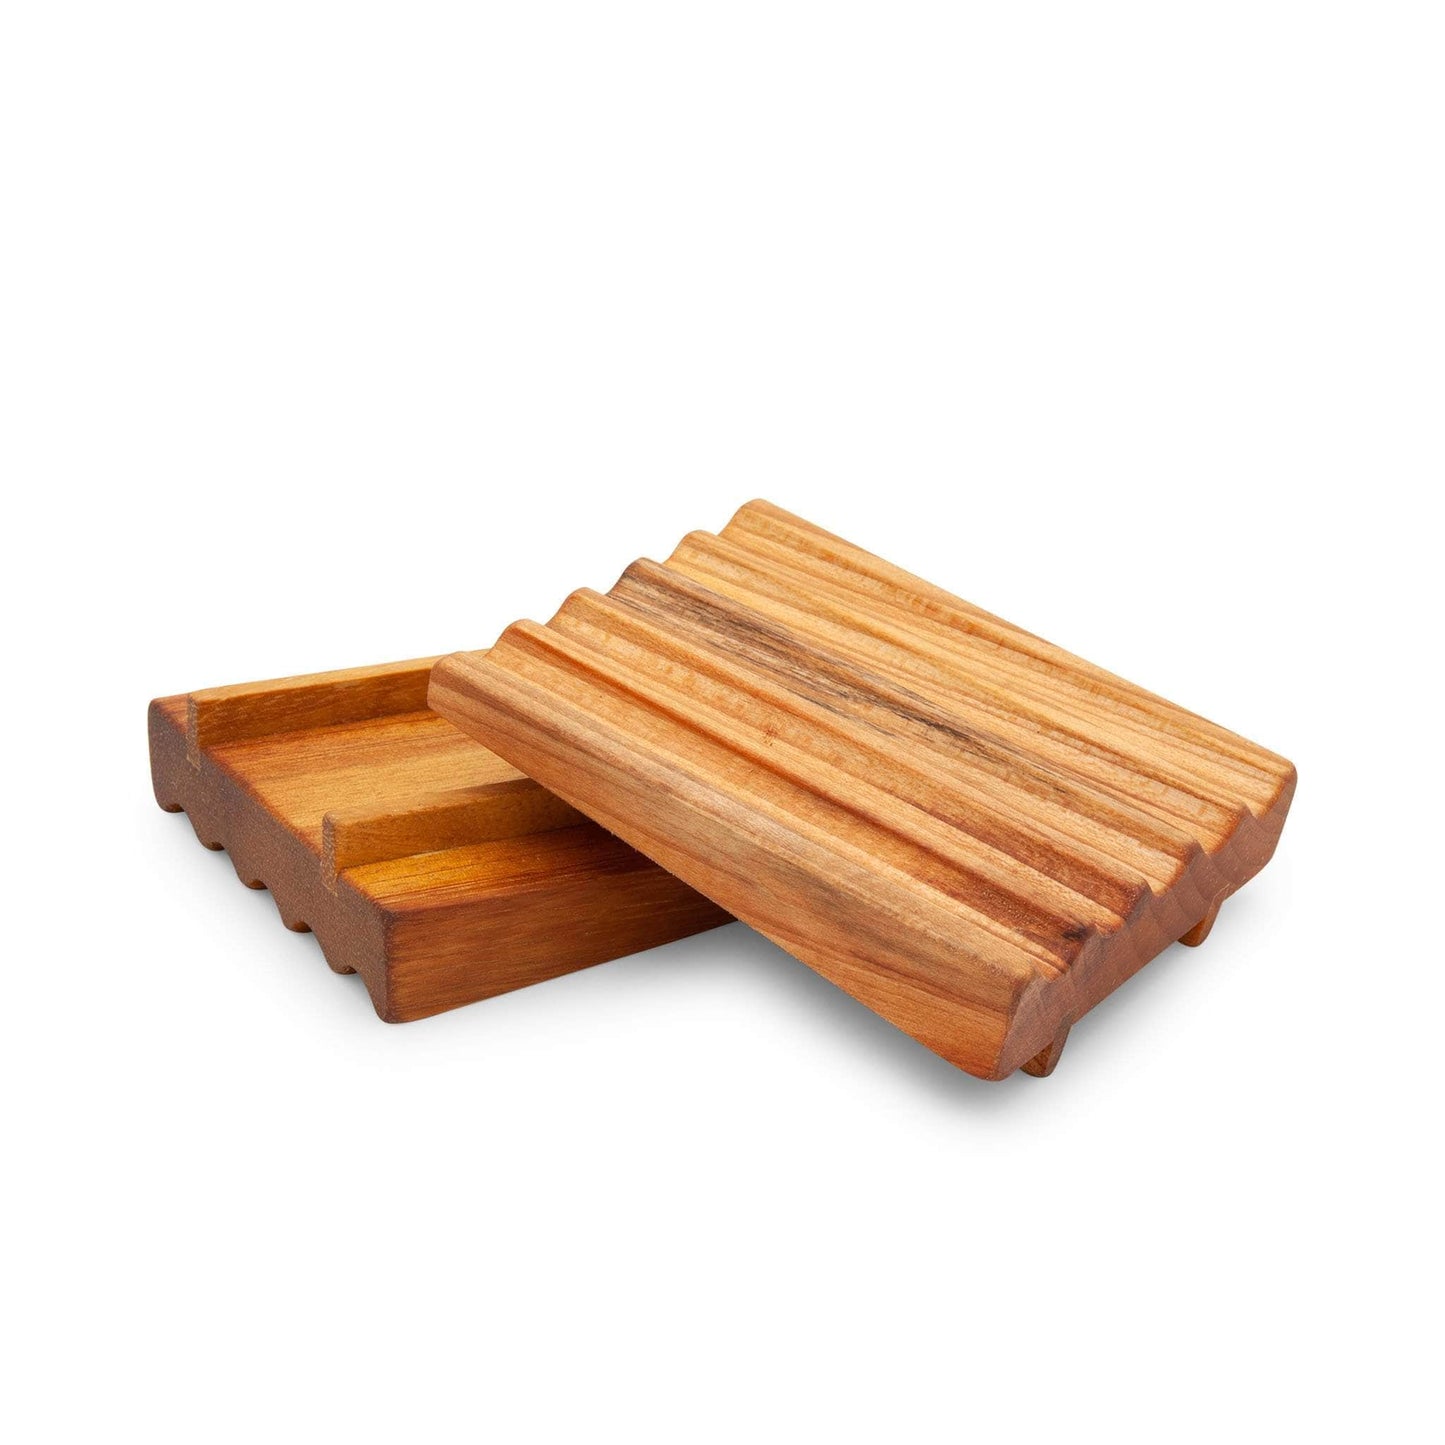 OC Woodturning Soap Dishes Natural Wooden Soap Dish - Iroko African Teak